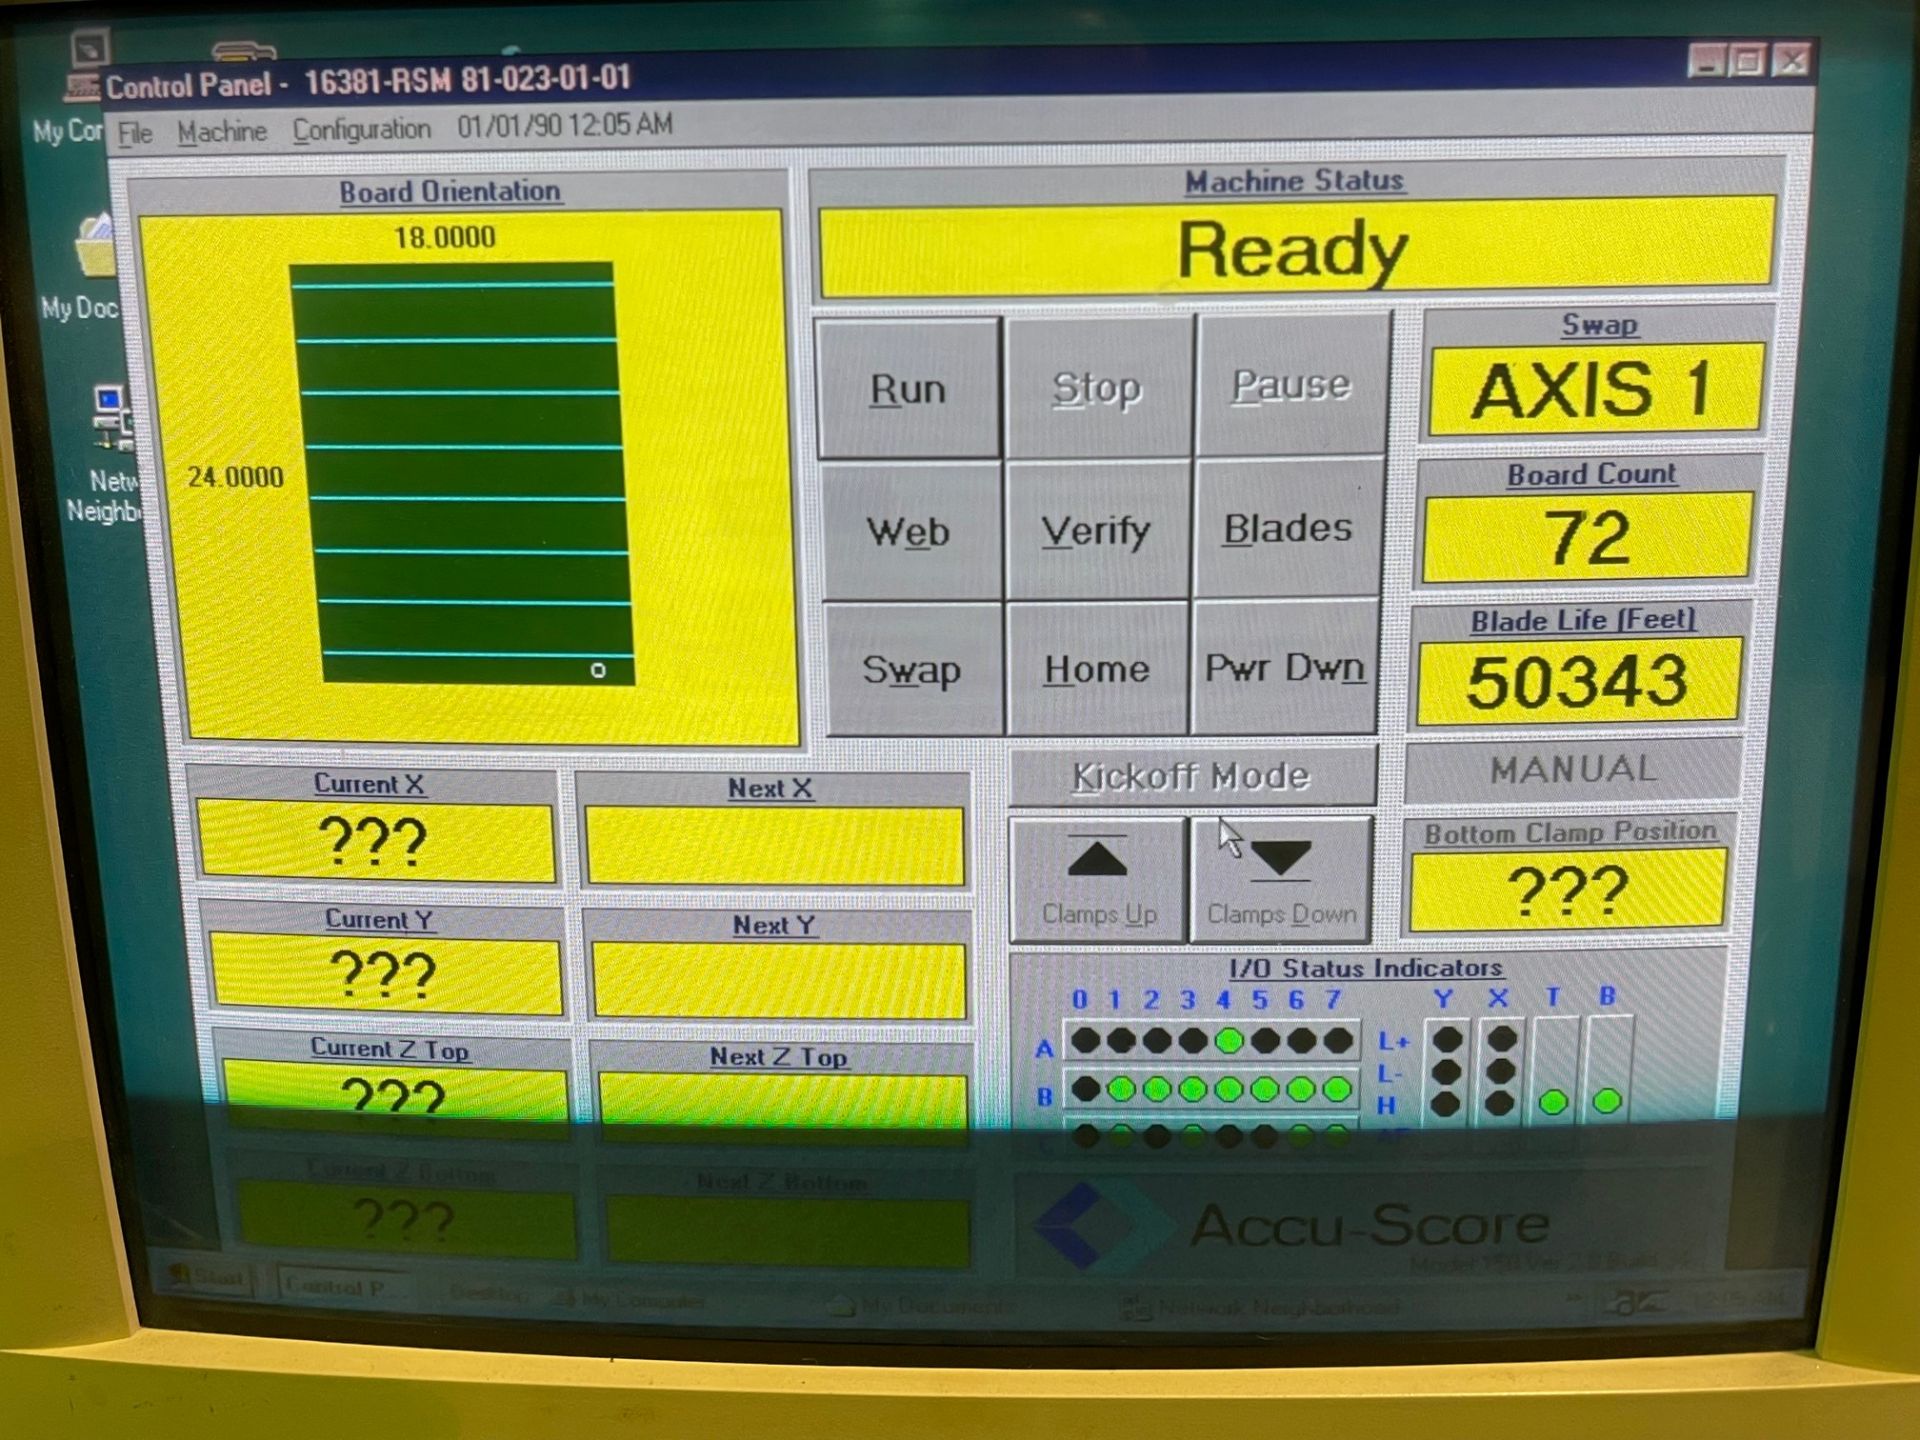 ACCUSYSTEMS ACCUSCORE AS-150-JE CNC V-SCORING SYSTEM, 200 FPM FEED RATE, POWER SOURCE: 235 VAC, 50/ - Image 6 of 11